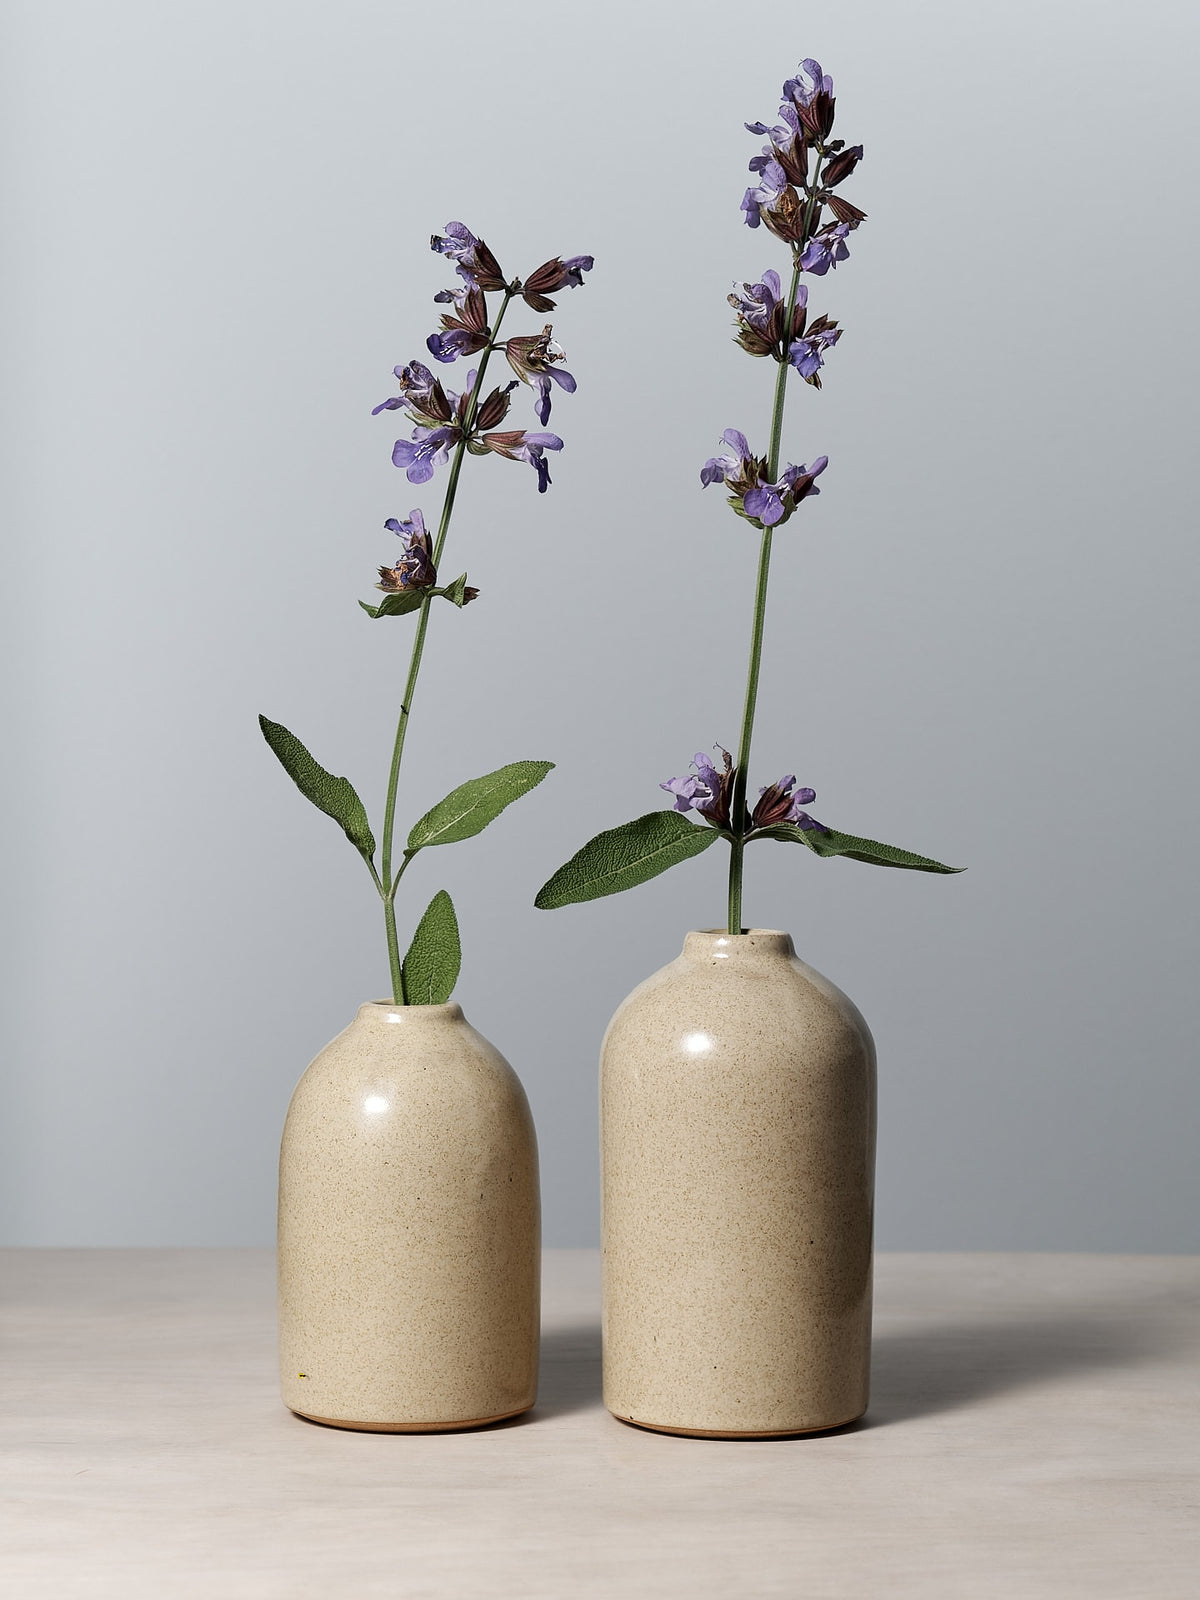 Two small Richard Beauchamp bud vases on a table with purple flowers in them.